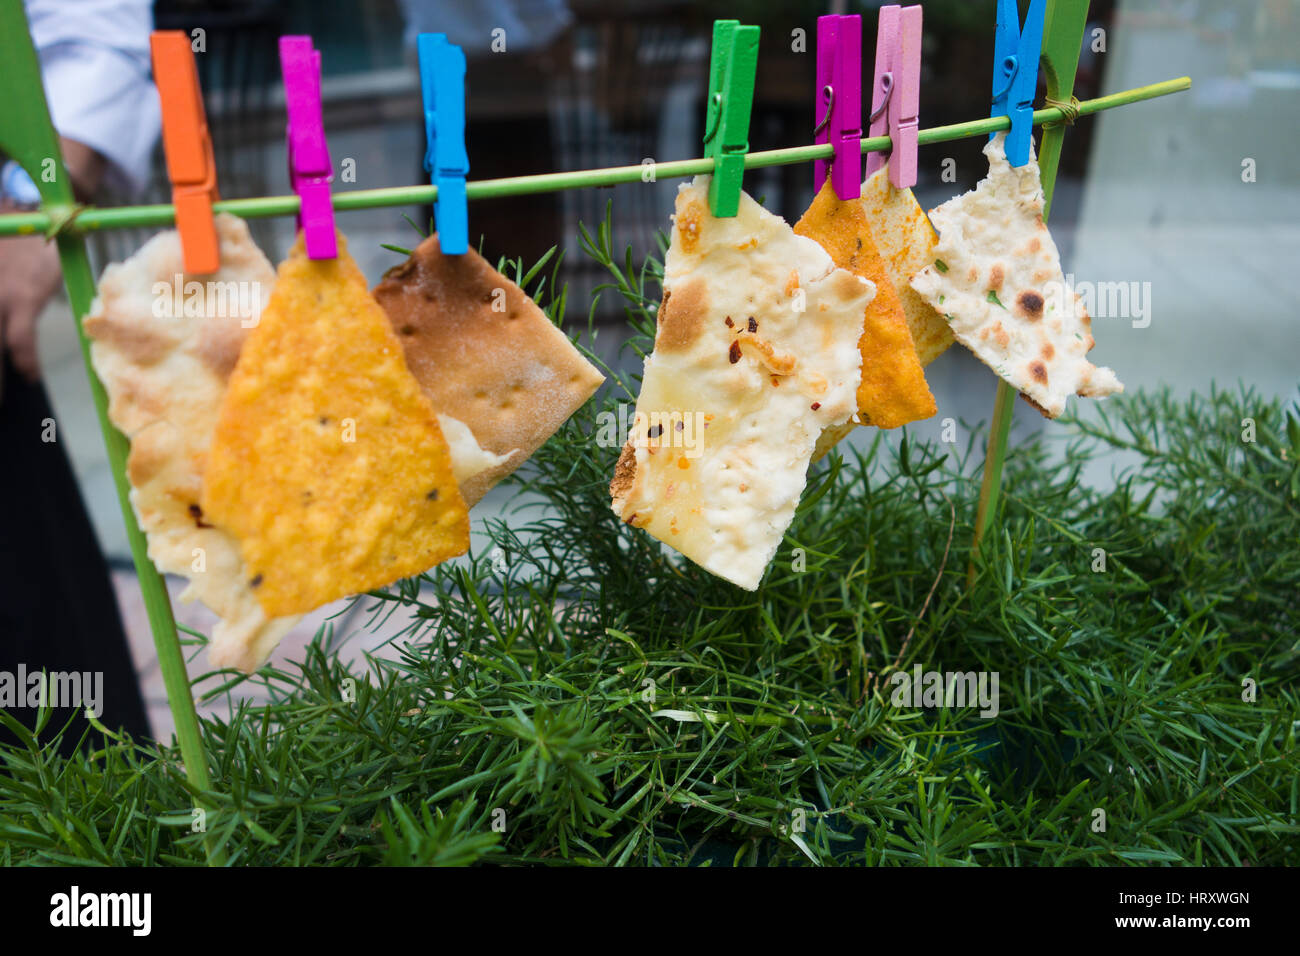 Creative food styling of nachos and flat bread hung using colored clips Stock Photo